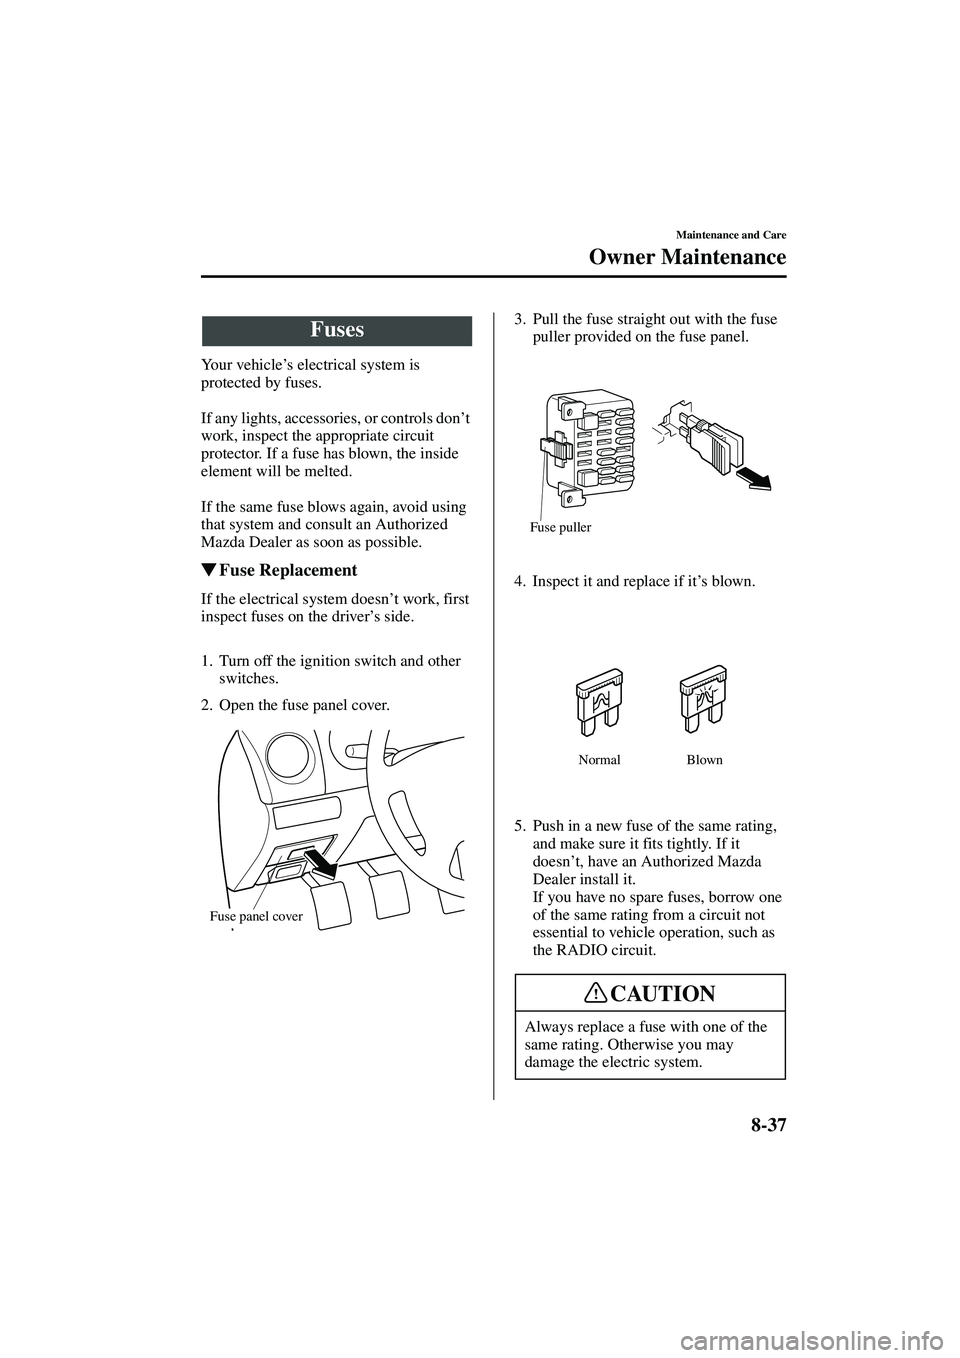 MAZDA MODEL MX-5 MIATA 2003  Owners Manual 8-37
Maintenance and Care
Owner Maintenance
Form No. 8R09-EA-02G
Yo u r  v e h i c l e’s electrical system is 
protected by fuses.
If any lights, accessories, or controls don ’t 
work, inspect the